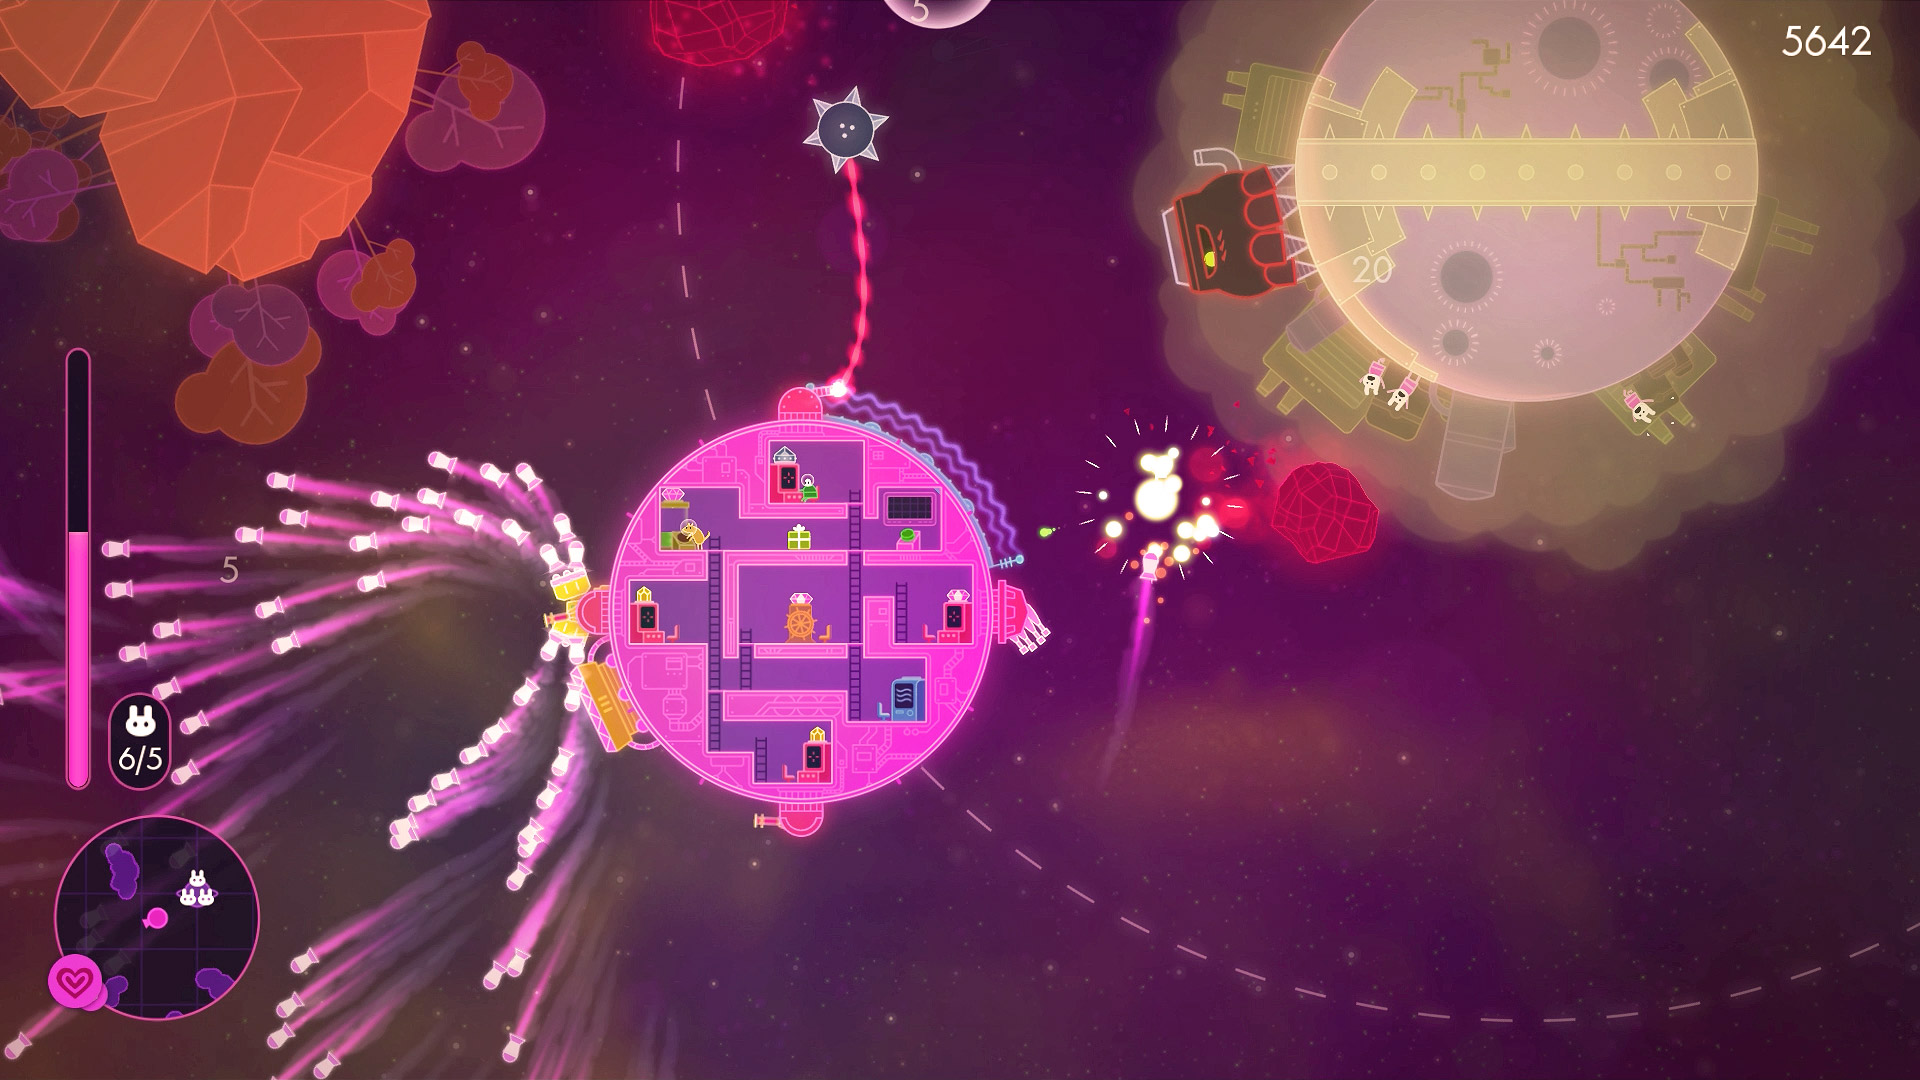 [PAX East 14] Lovers in a Dangerous Spacetime Preview: Those Who Platform Together Stay Together